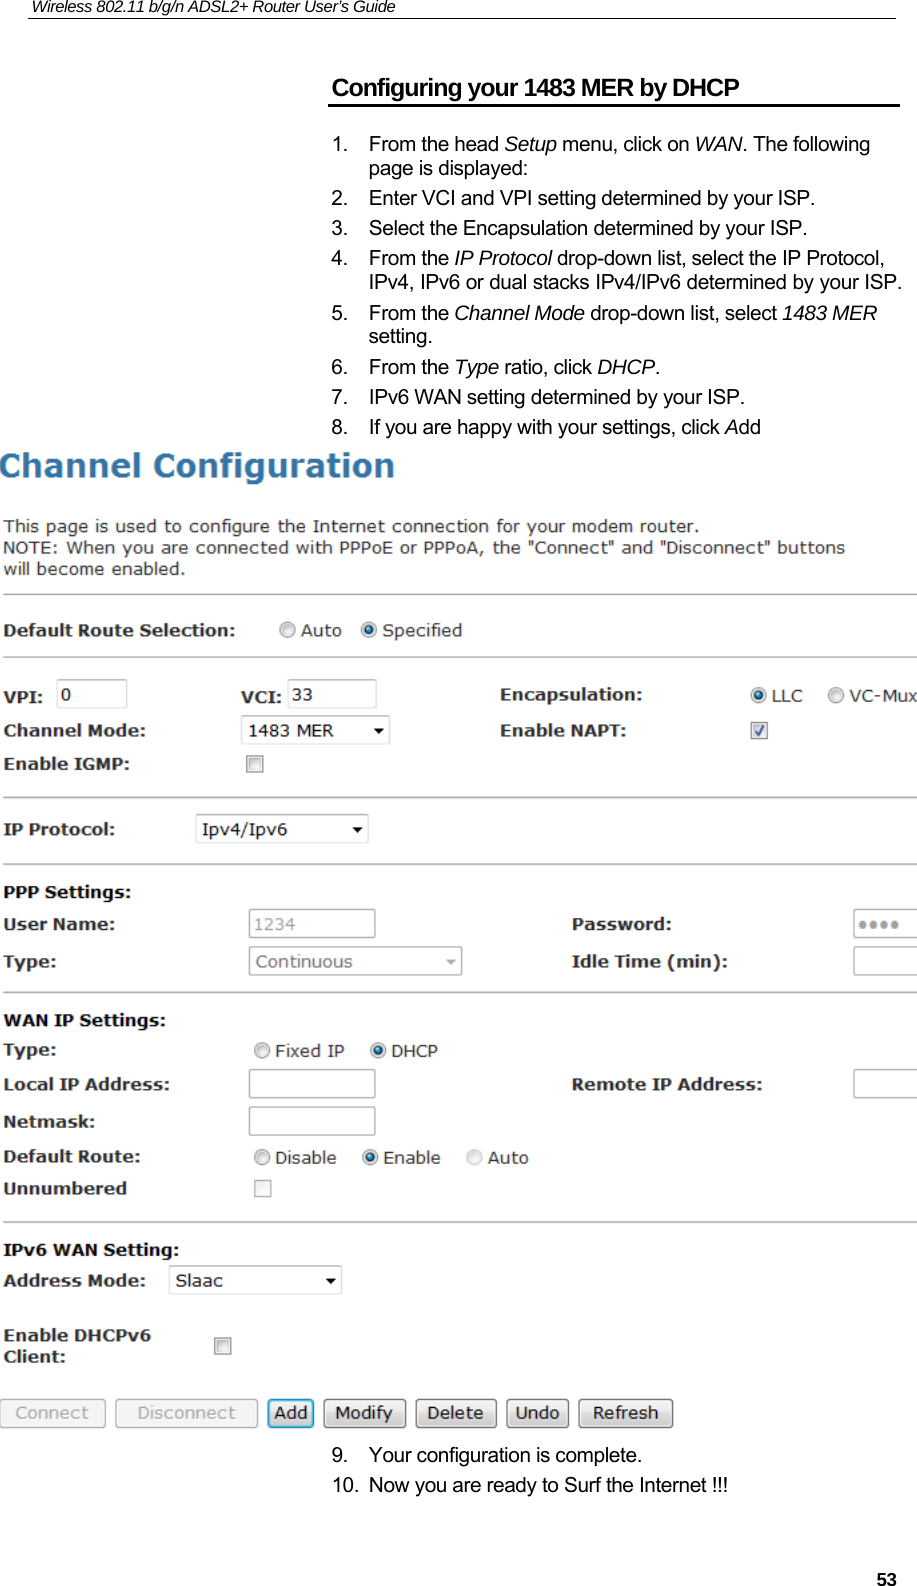 Wireless 802.11 b/g/n ADSL2+ Router User’s Guide    Configuring your 1483 MER by DHCP 1. From the head Setup menu, click on WAN. The following page is displayed: 2.  Enter VCI and VPI setting determined by your ISP. 3.  Select the Encapsulation determined by your ISP. 4. From the IP Protocol drop-down list, select the IP Protocol, IPv4, IPv6 or dual stacks IPv4/IPv6 determined by your ISP. 5. From the Channel Mode drop-down list, select 1483 MER setting. 6. From the Type ratio, click DHCP. 7.  IPv6 WAN setting determined by your ISP. 8.  If you are happy with your settings, click Add  9.  Your configuration is complete. 10.  Now you are ready to Surf the Internet !!!  53